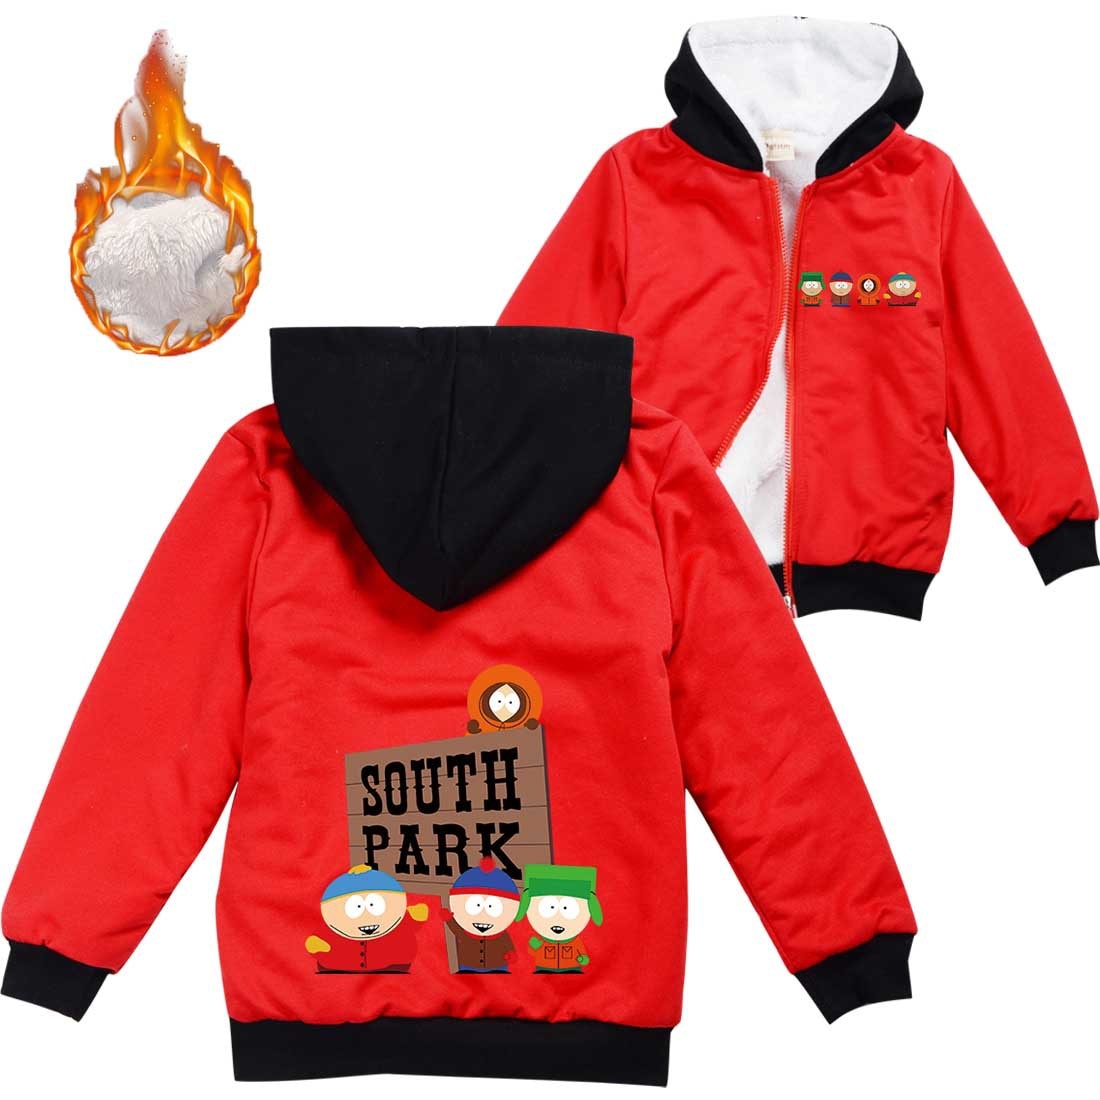 Anime S Southes Park Clothes Kids Warm Thick Velvet Hoody Jacket Teenager Boys Clothes Baby Girls 4 - South Park Plush